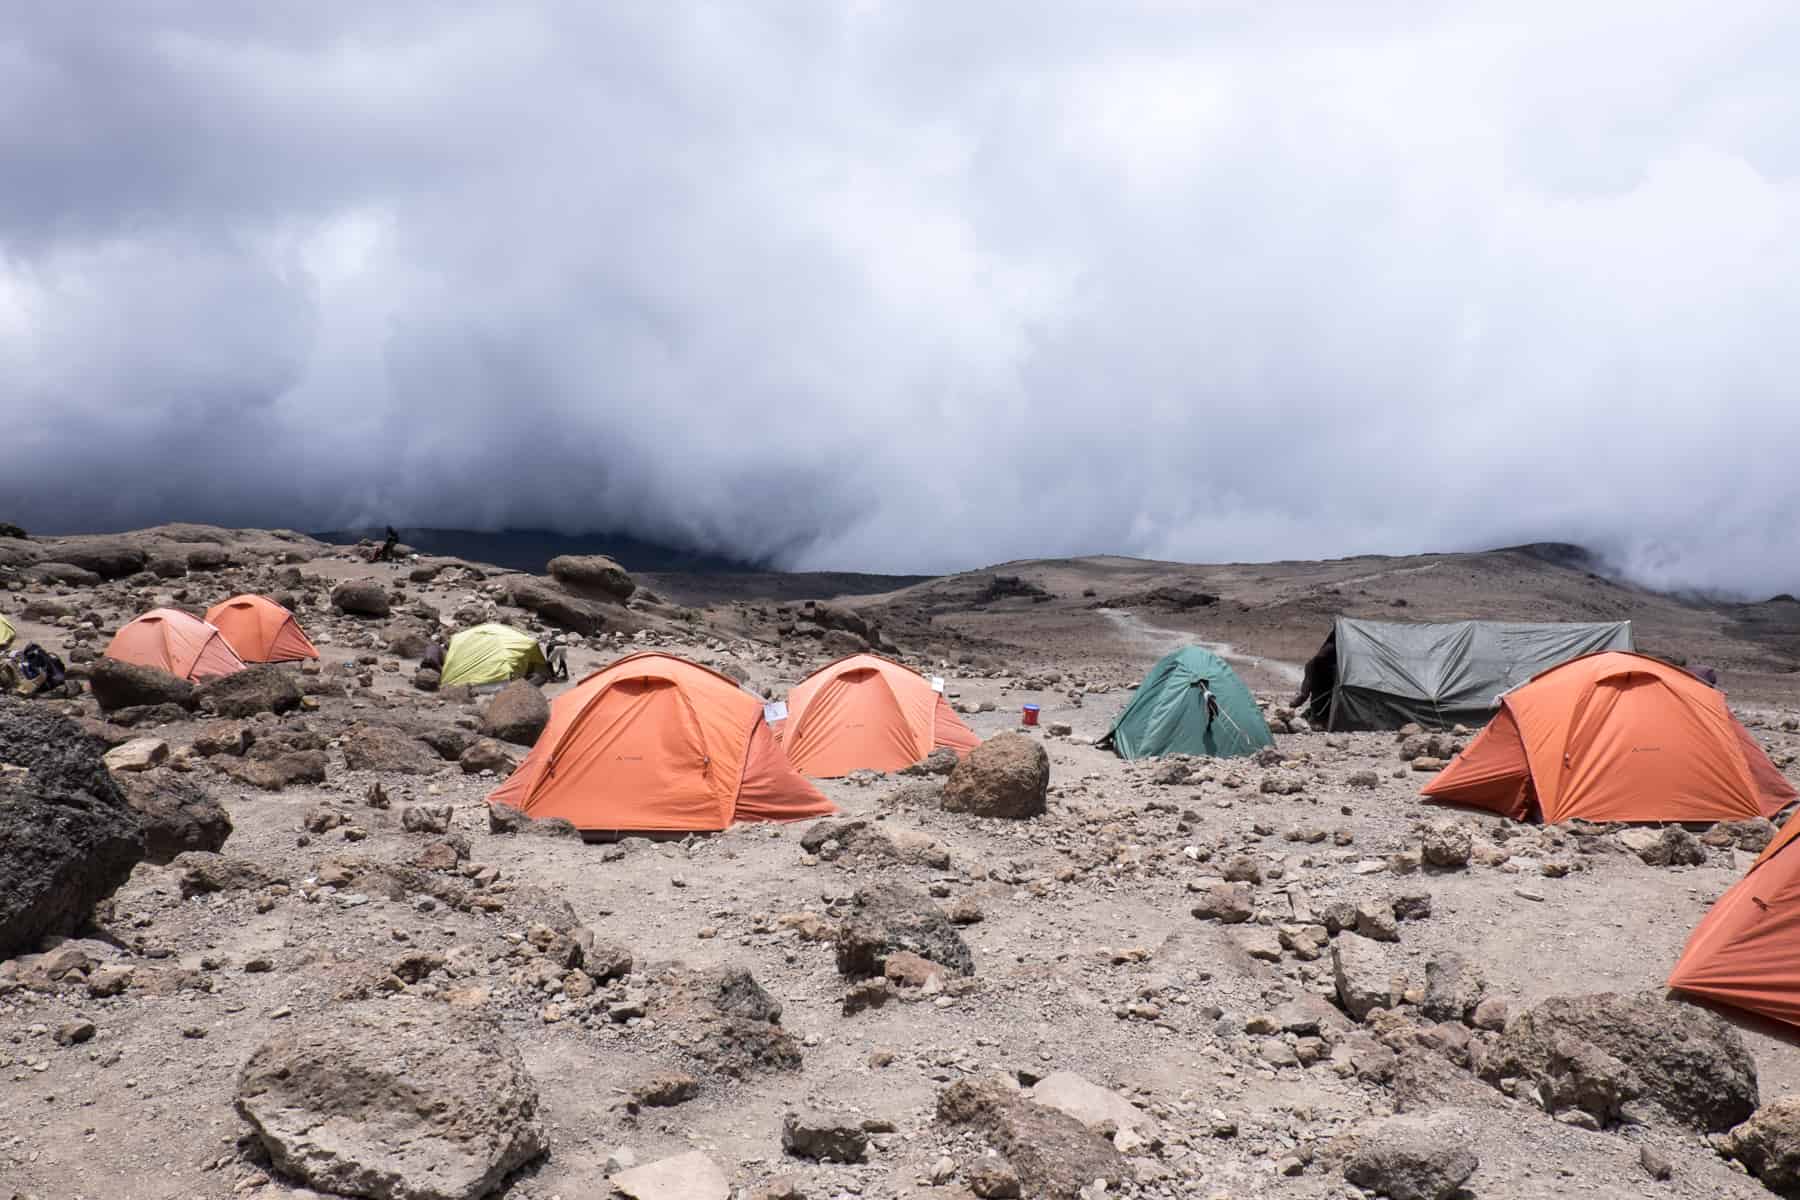 Six orange and three green tents for a small camping ground on the brown, rocky Kilimanjaro Base Camp